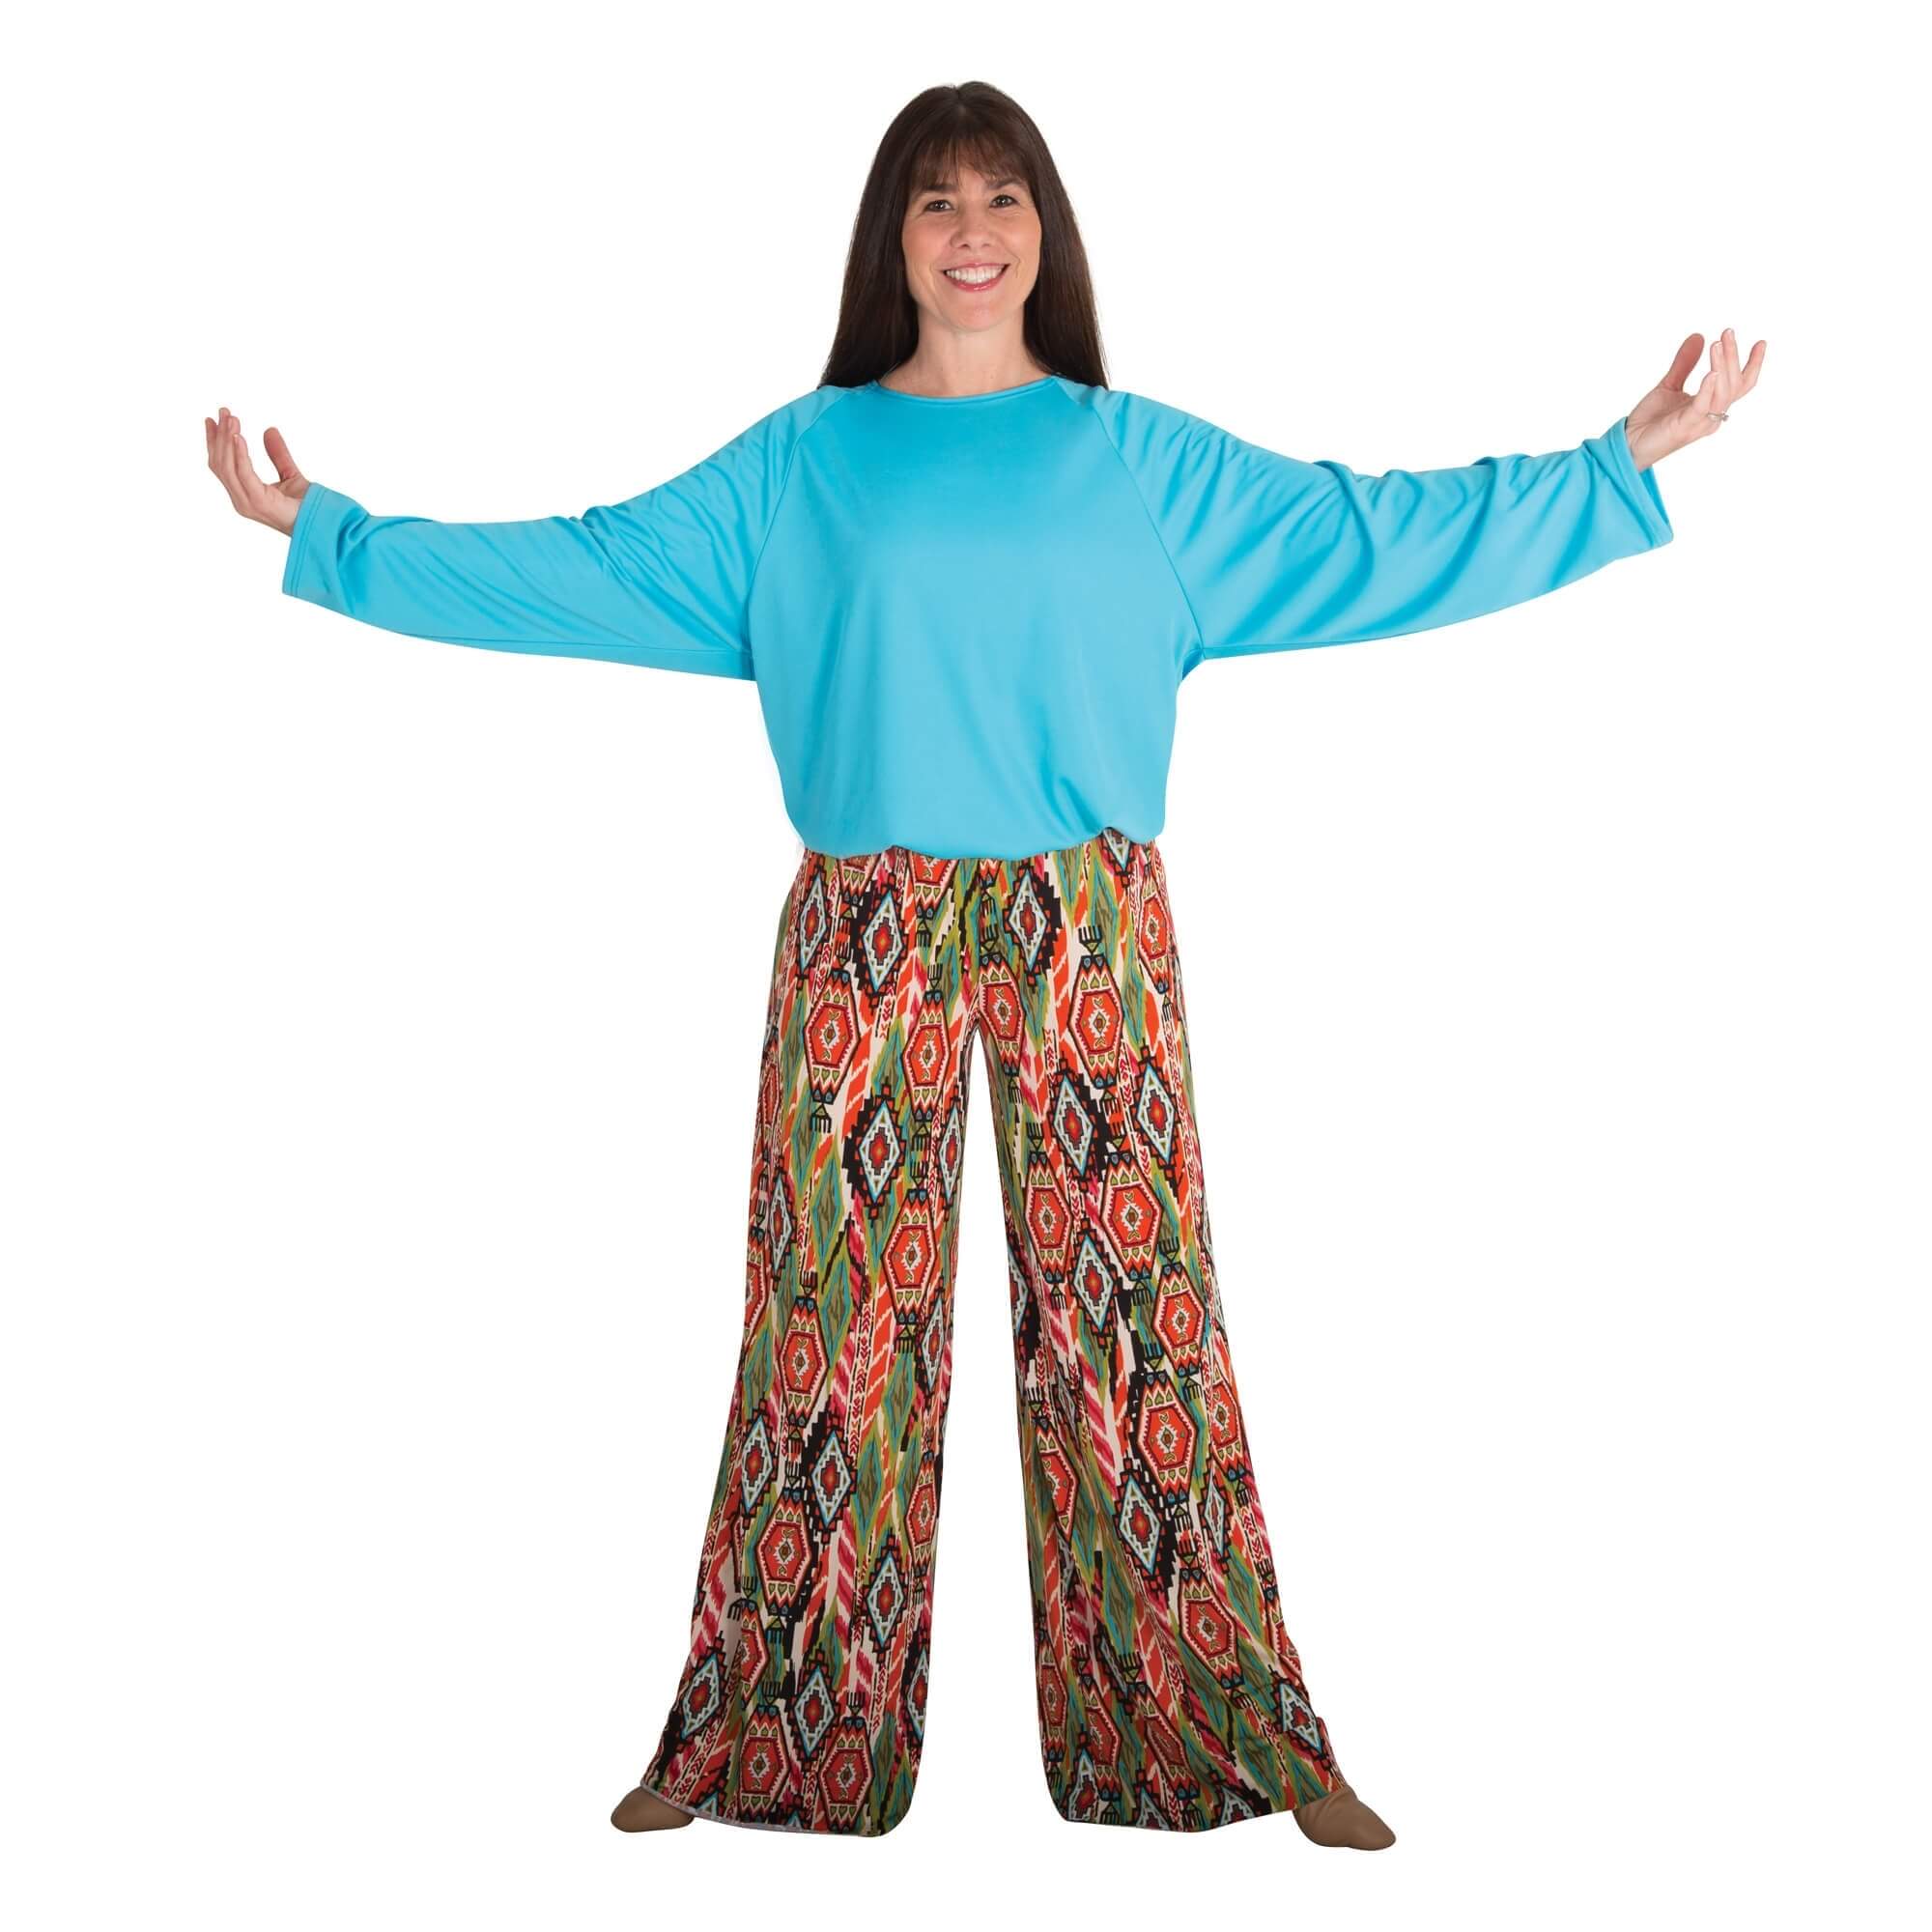 Body Wrappers Worship Dance Printed Palazzo Pants